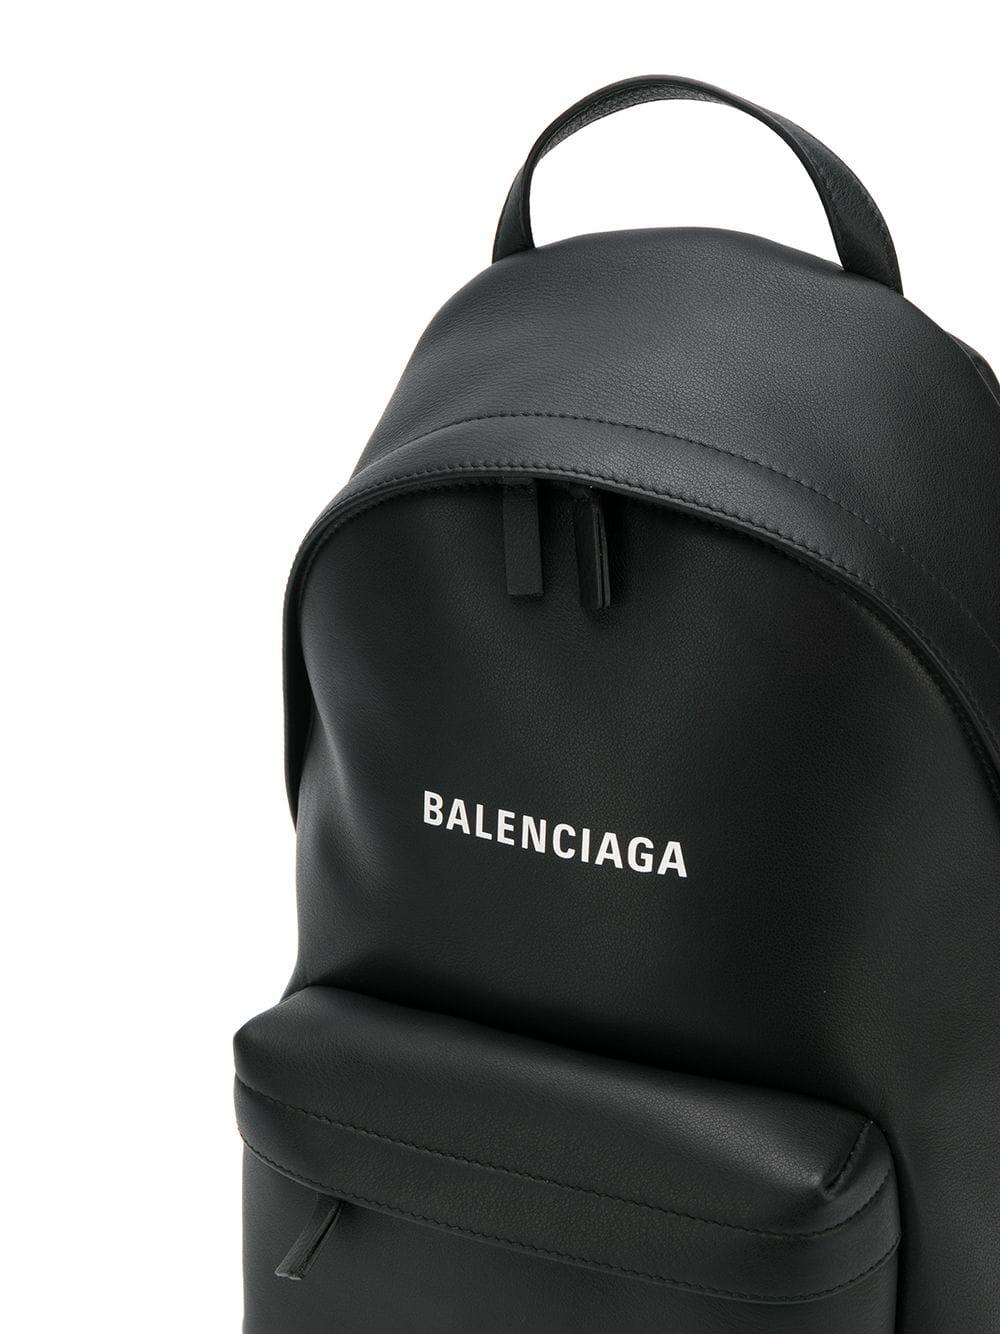 Balenciaga Everyday Backpack Small Leather Black/white - Lyst